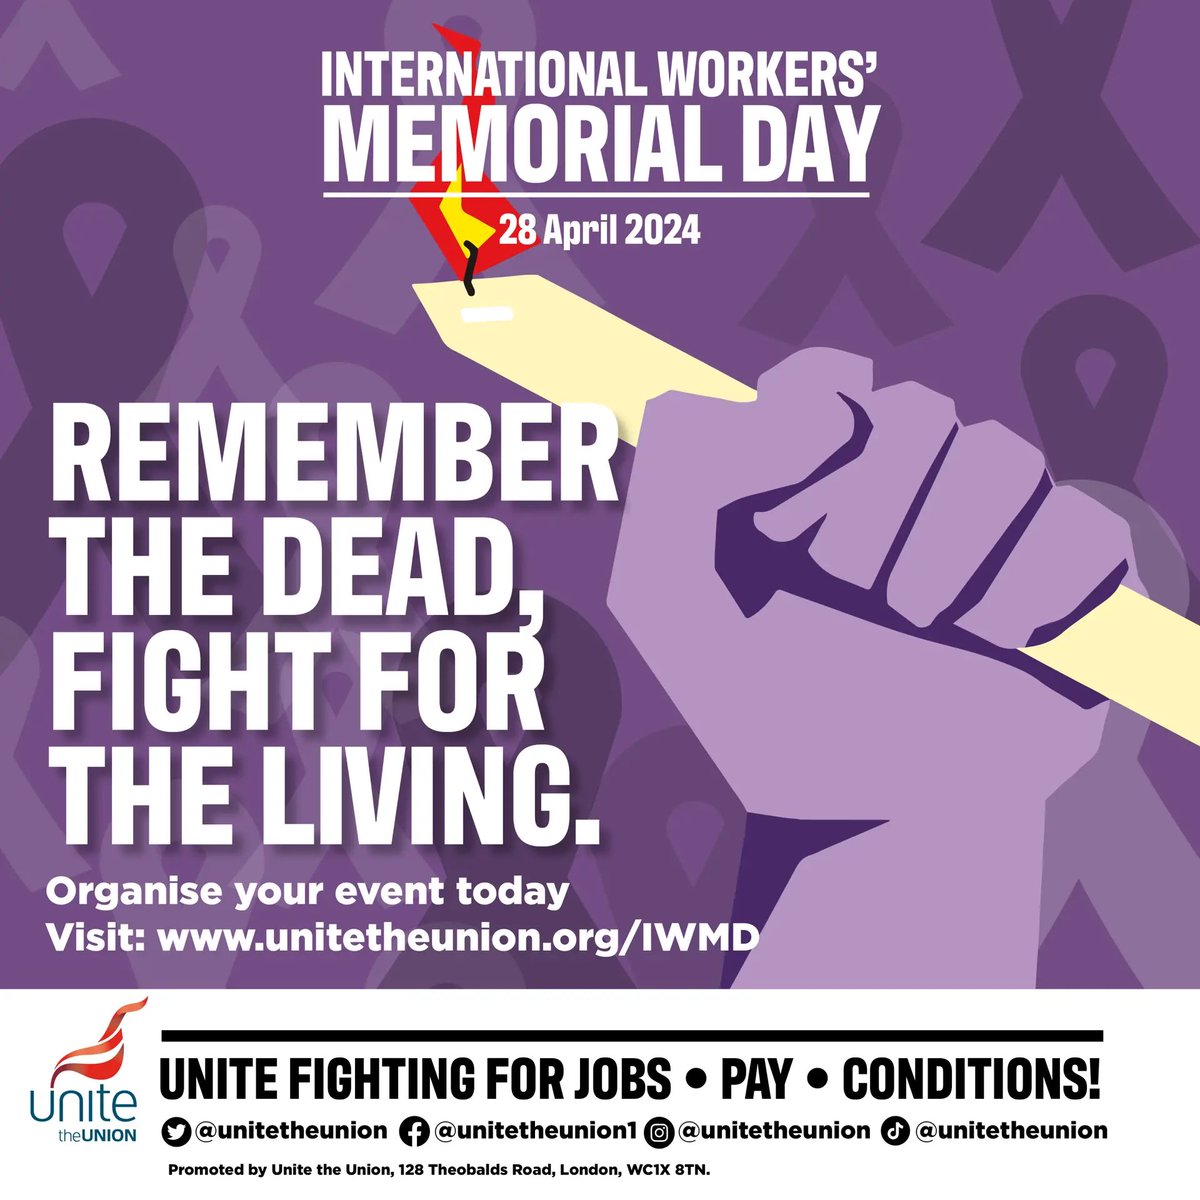 It’s so important today and everyday we remember those who lost their lives at work. That we never stop striding towards workplaces in which everyone comes home at the end of their shift. #IWMD24 #PrayForTheDead #FightLikeHellForTheLiving